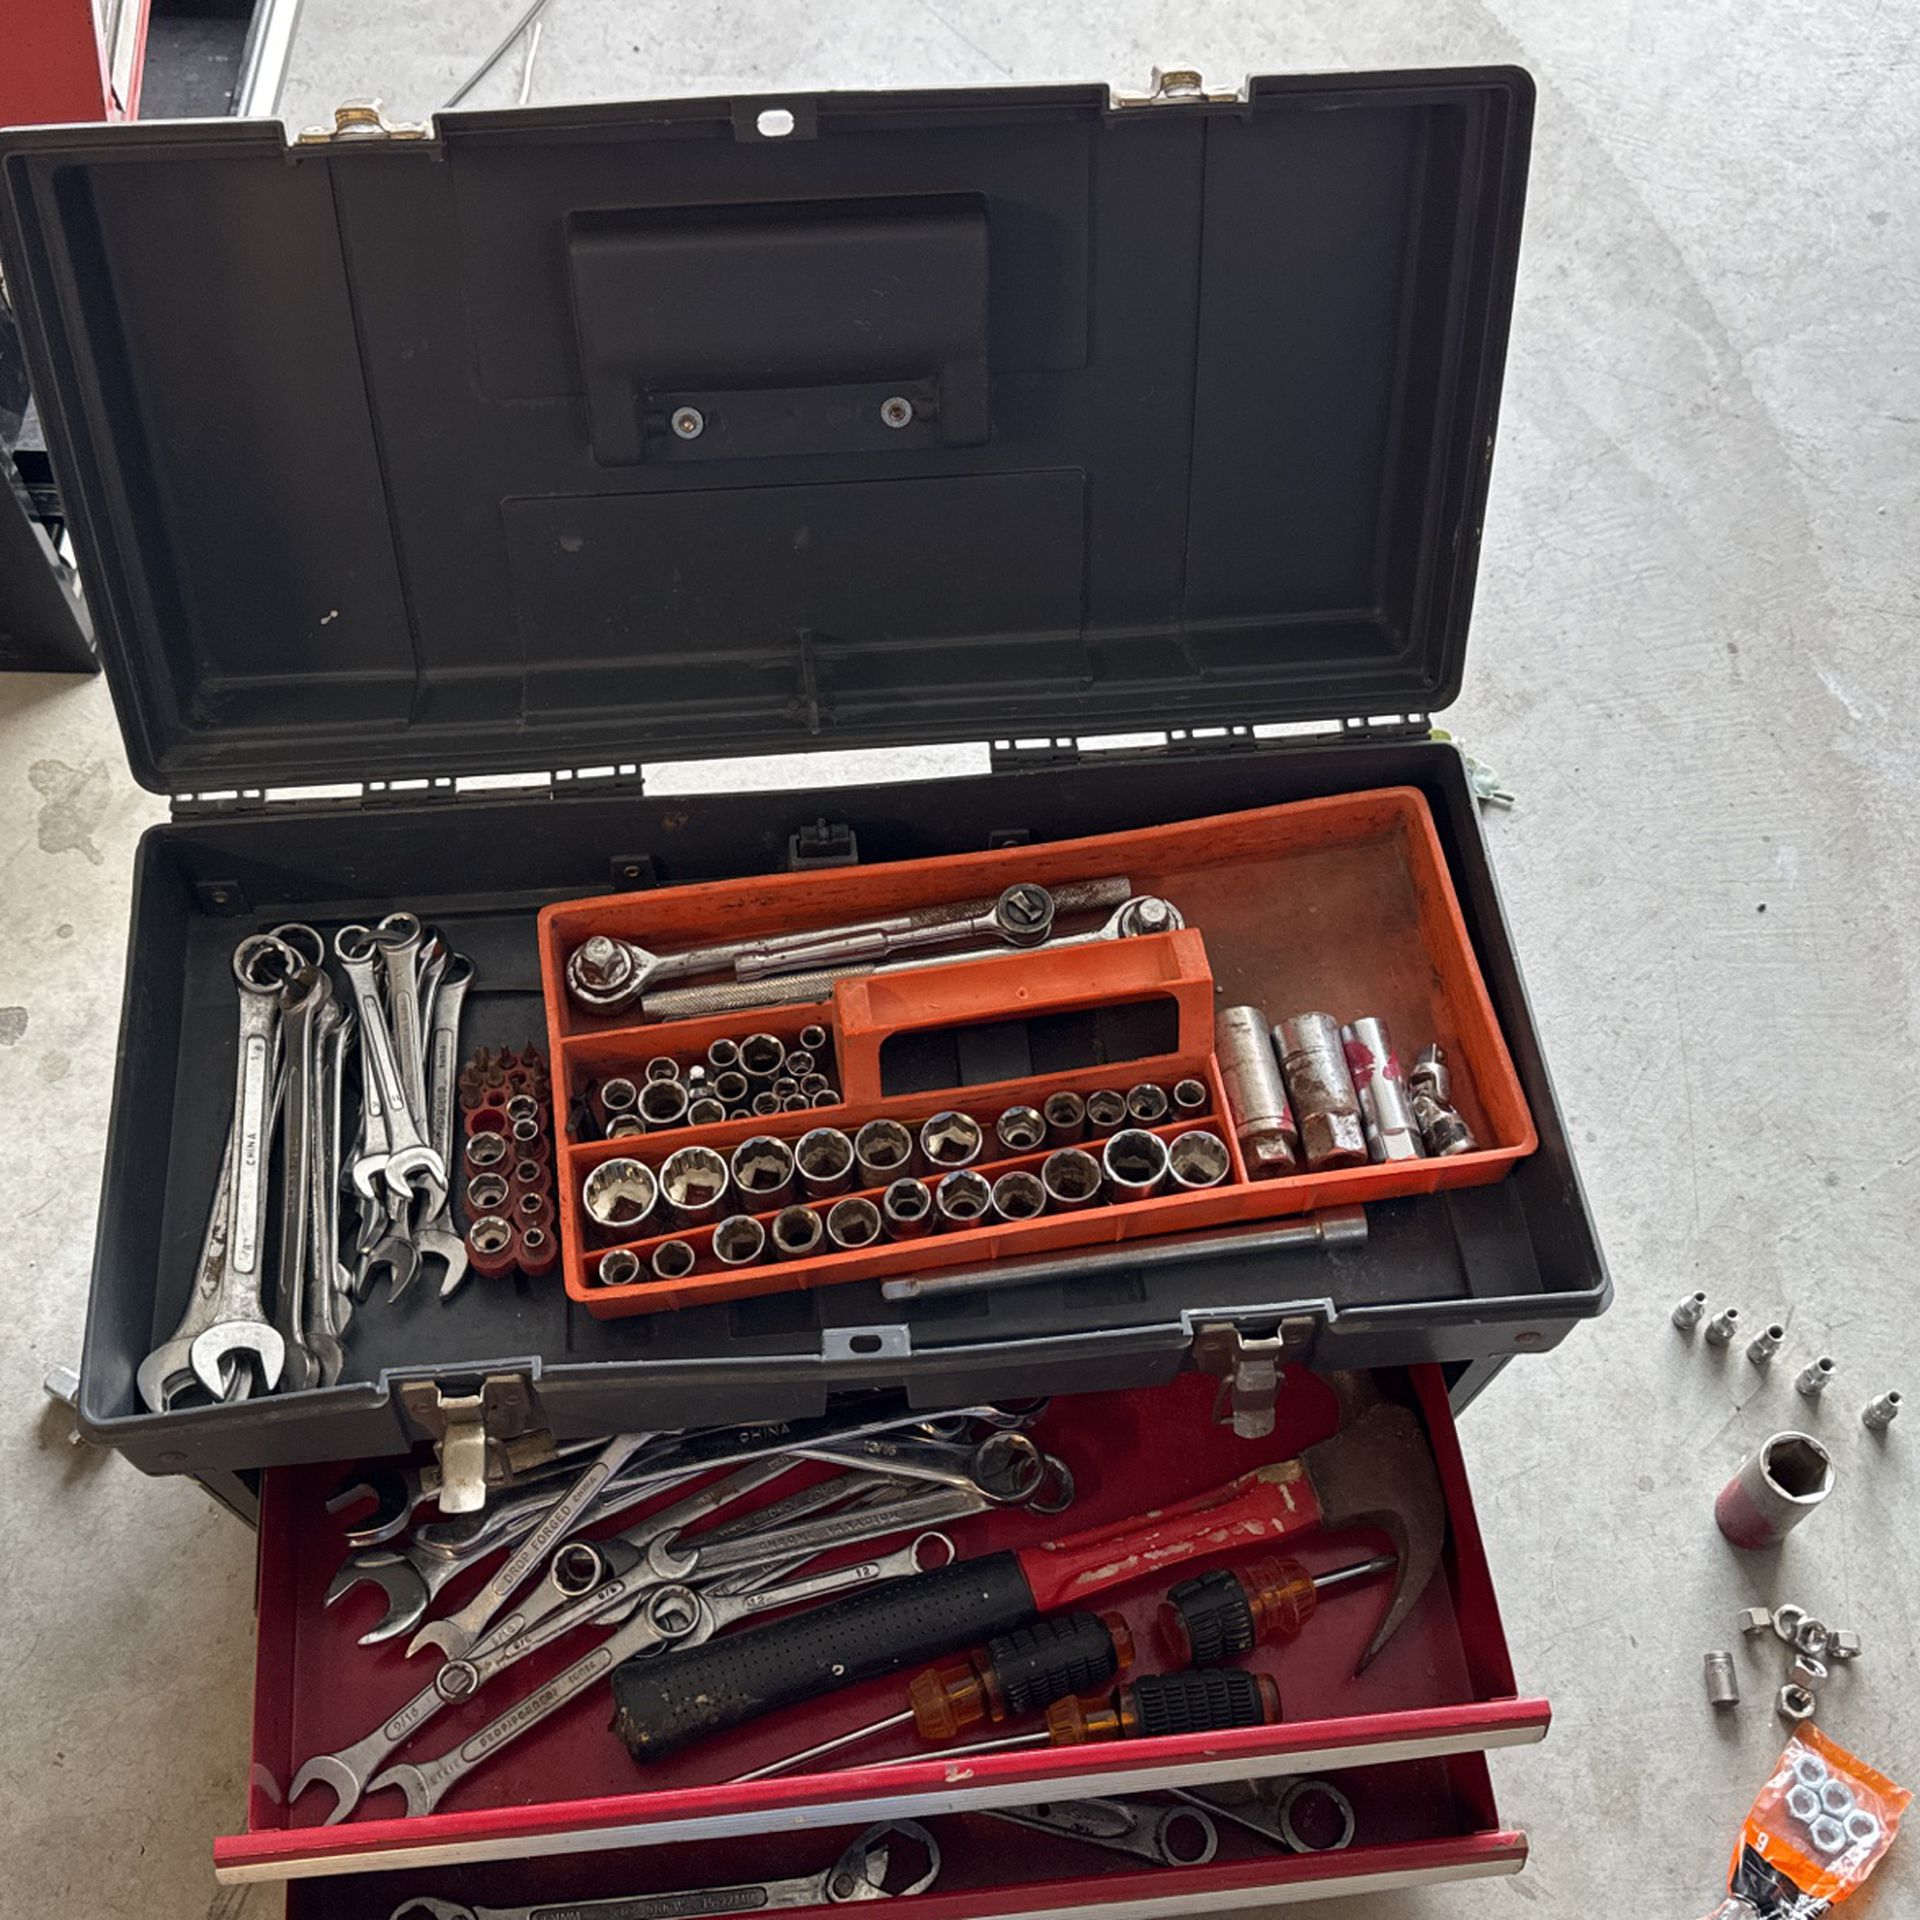 Took Box Kit W/ Wrenches Hammer Sockets Perfect For Home 